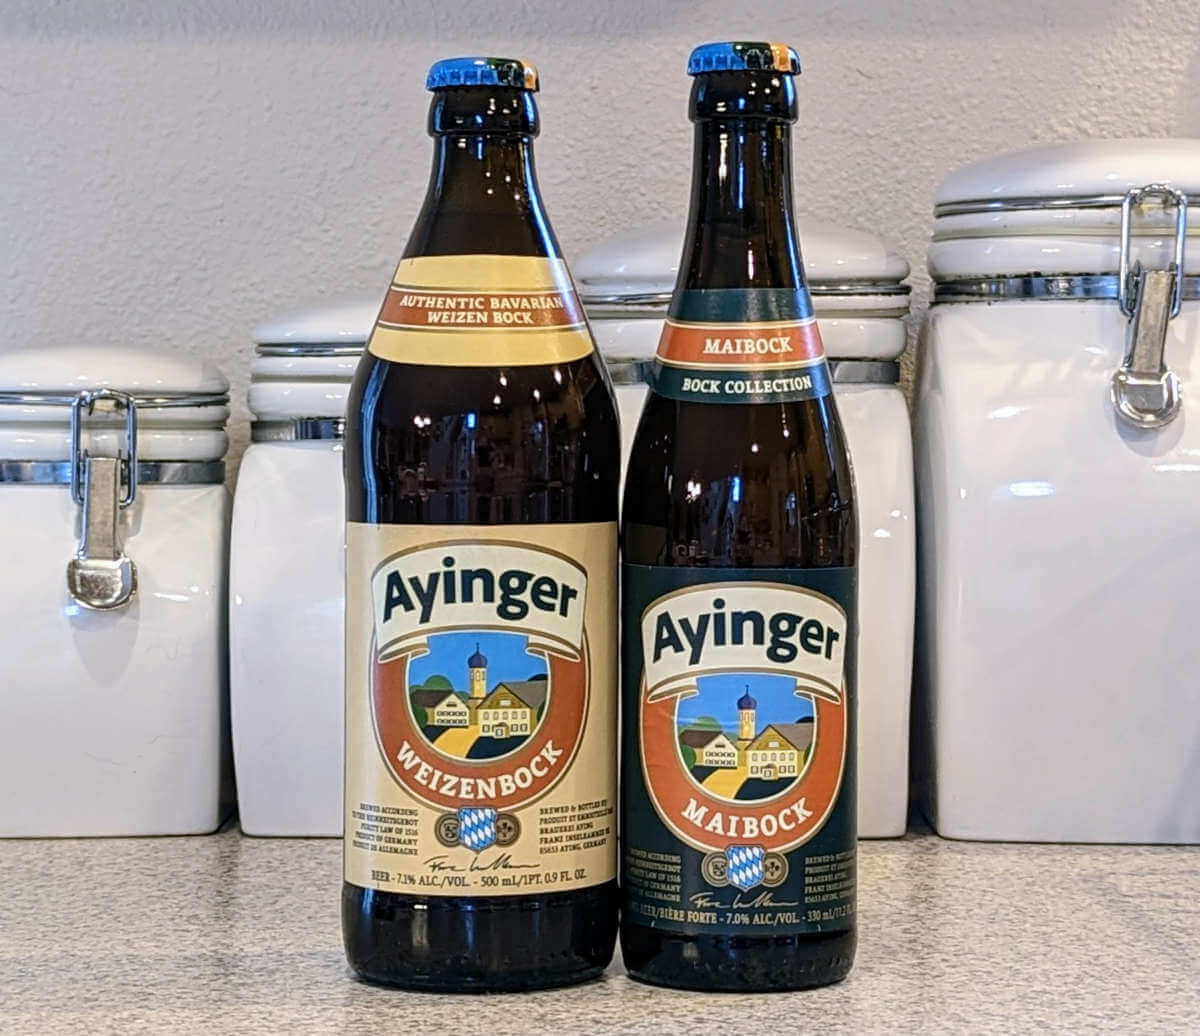 Received: Ayinger Weizenbock and Maibock